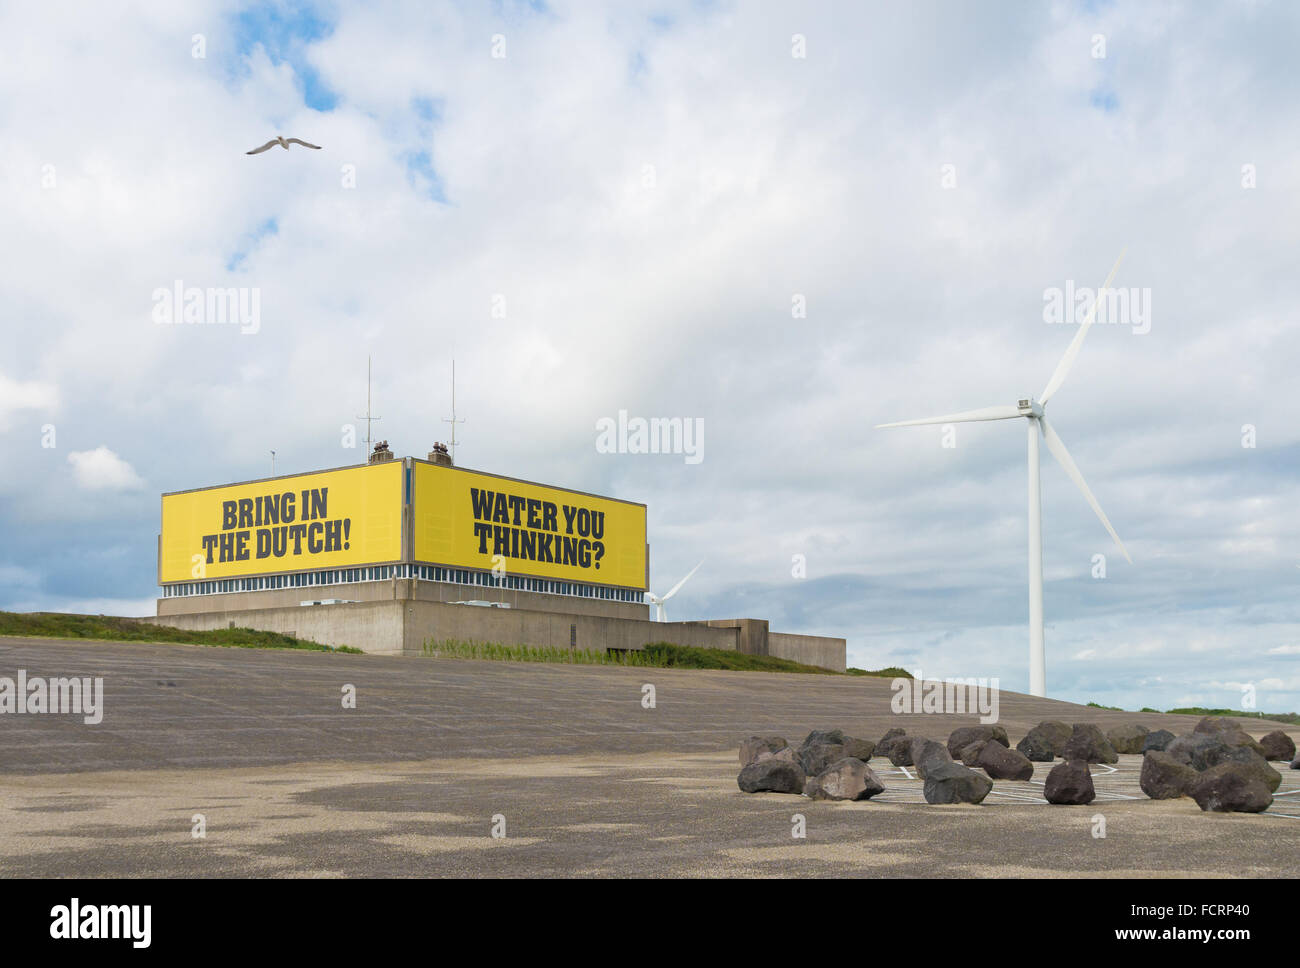 VEERE, NETHERLANDS - JULY 18, 2015: Building with text on the artificial island Neeltje Jans in Zeeland as a remembrance of the Stock Photo